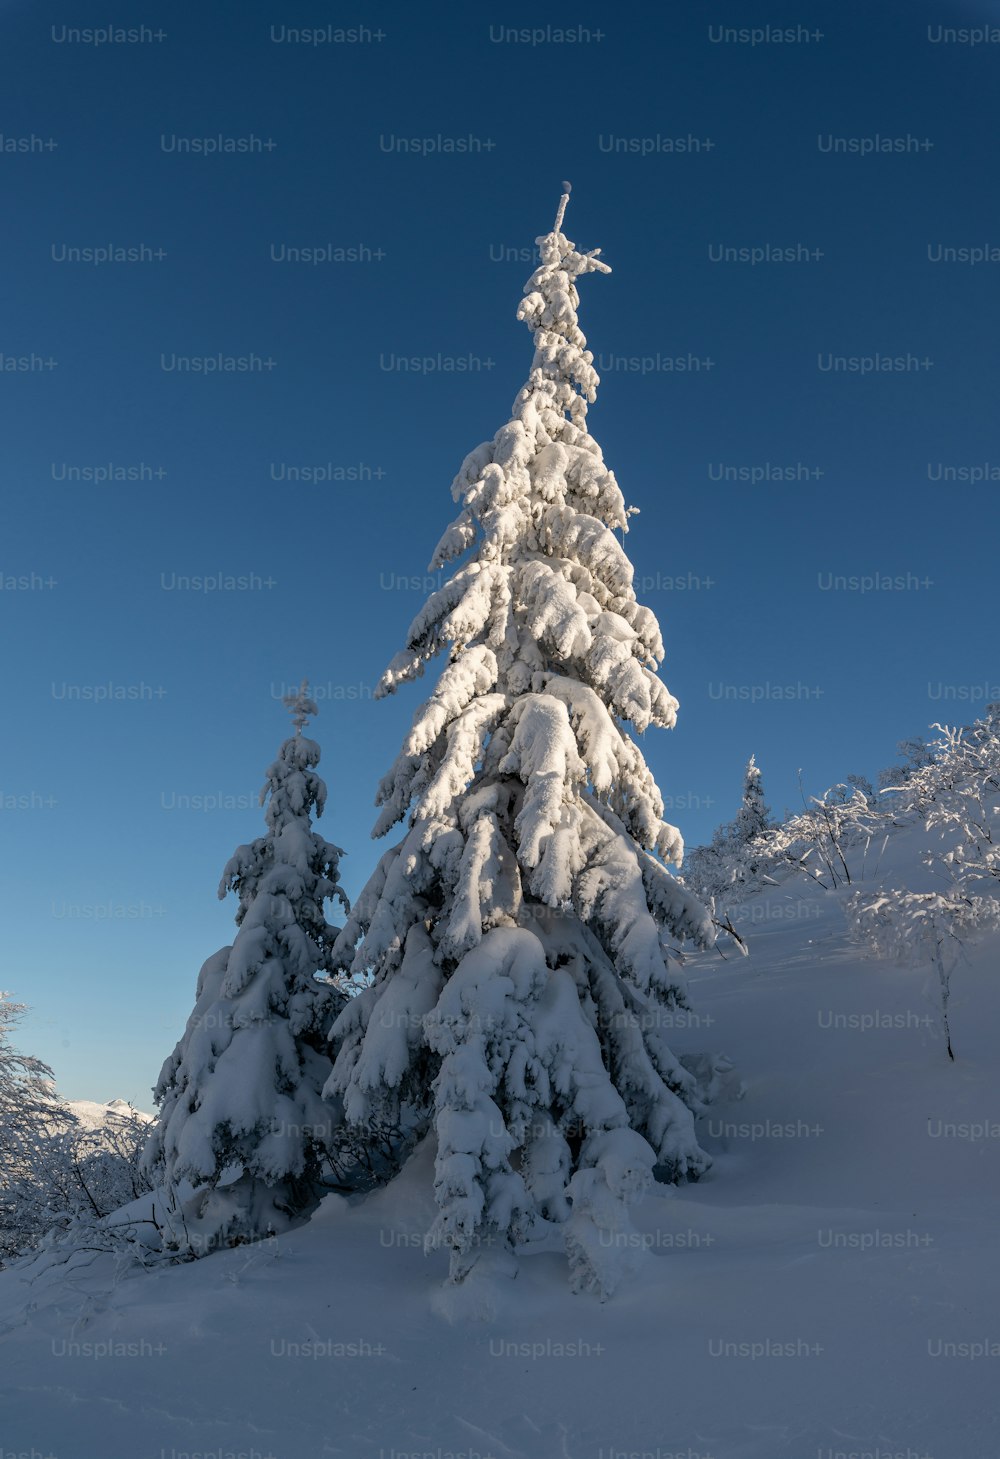 a snow covered pine tree in the middle of a snowy field